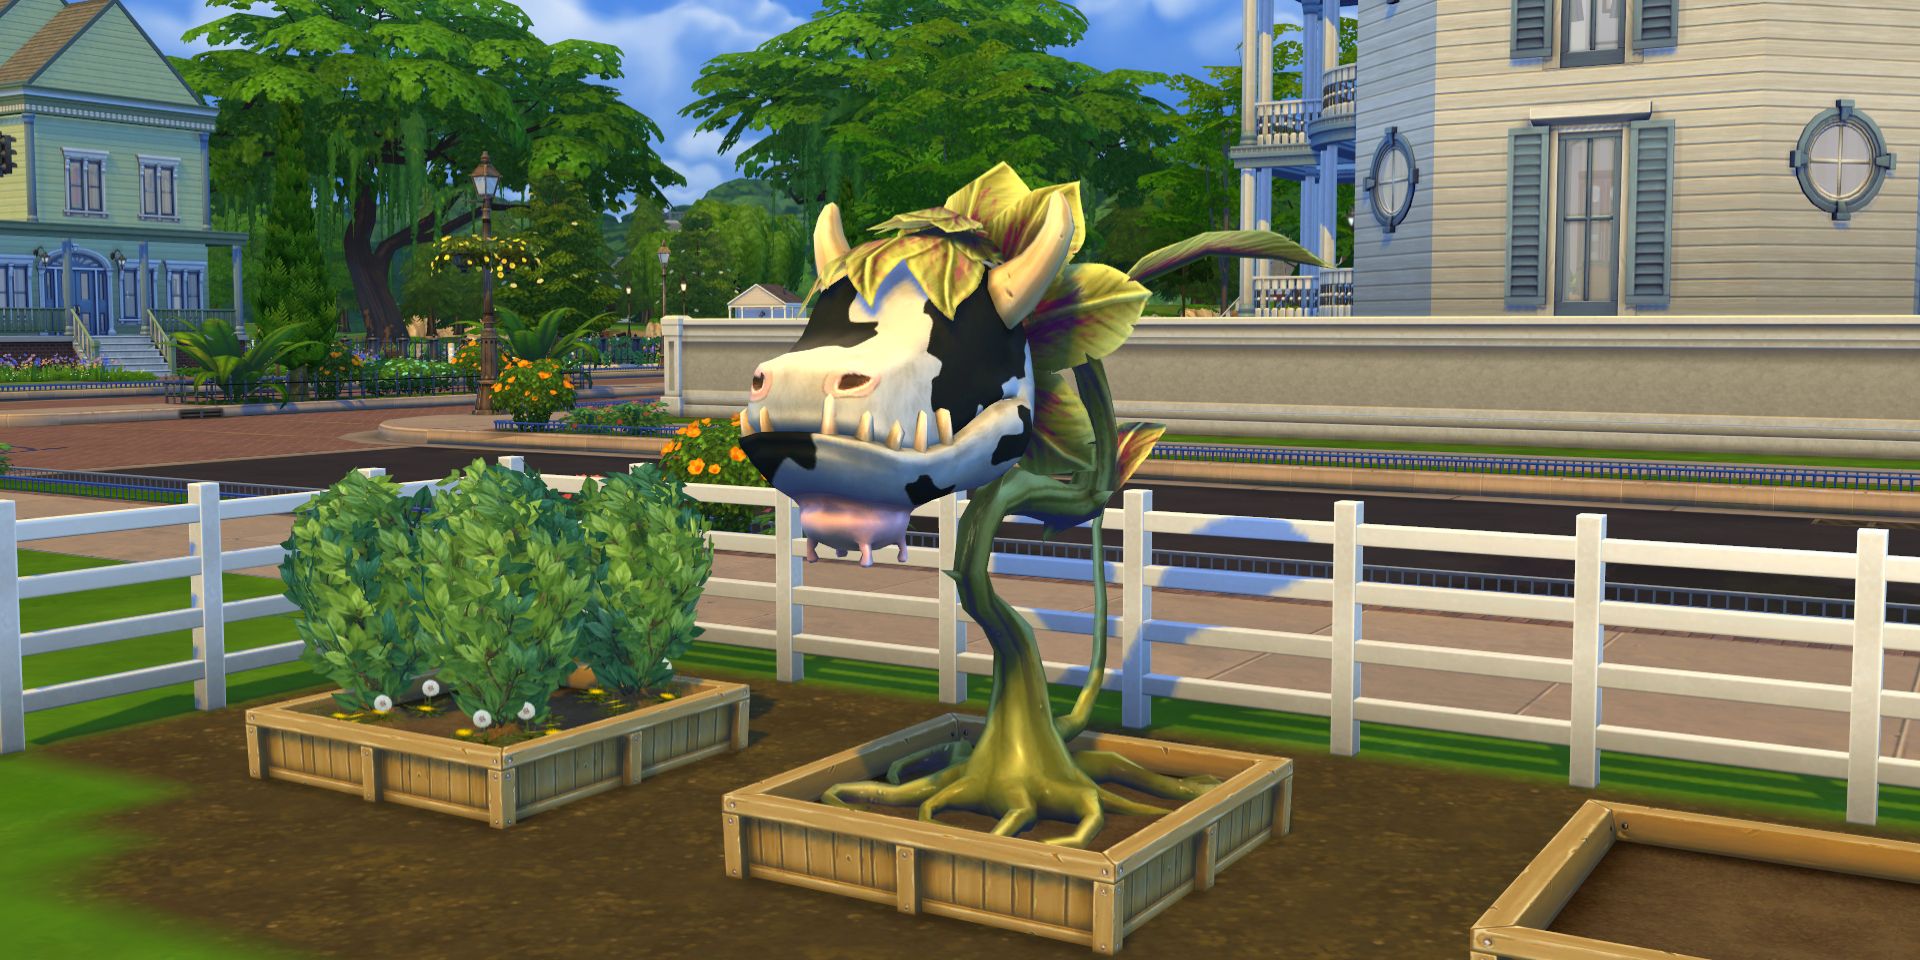 A giant cowplant grows in the middle of a garden during the day in The Sims.